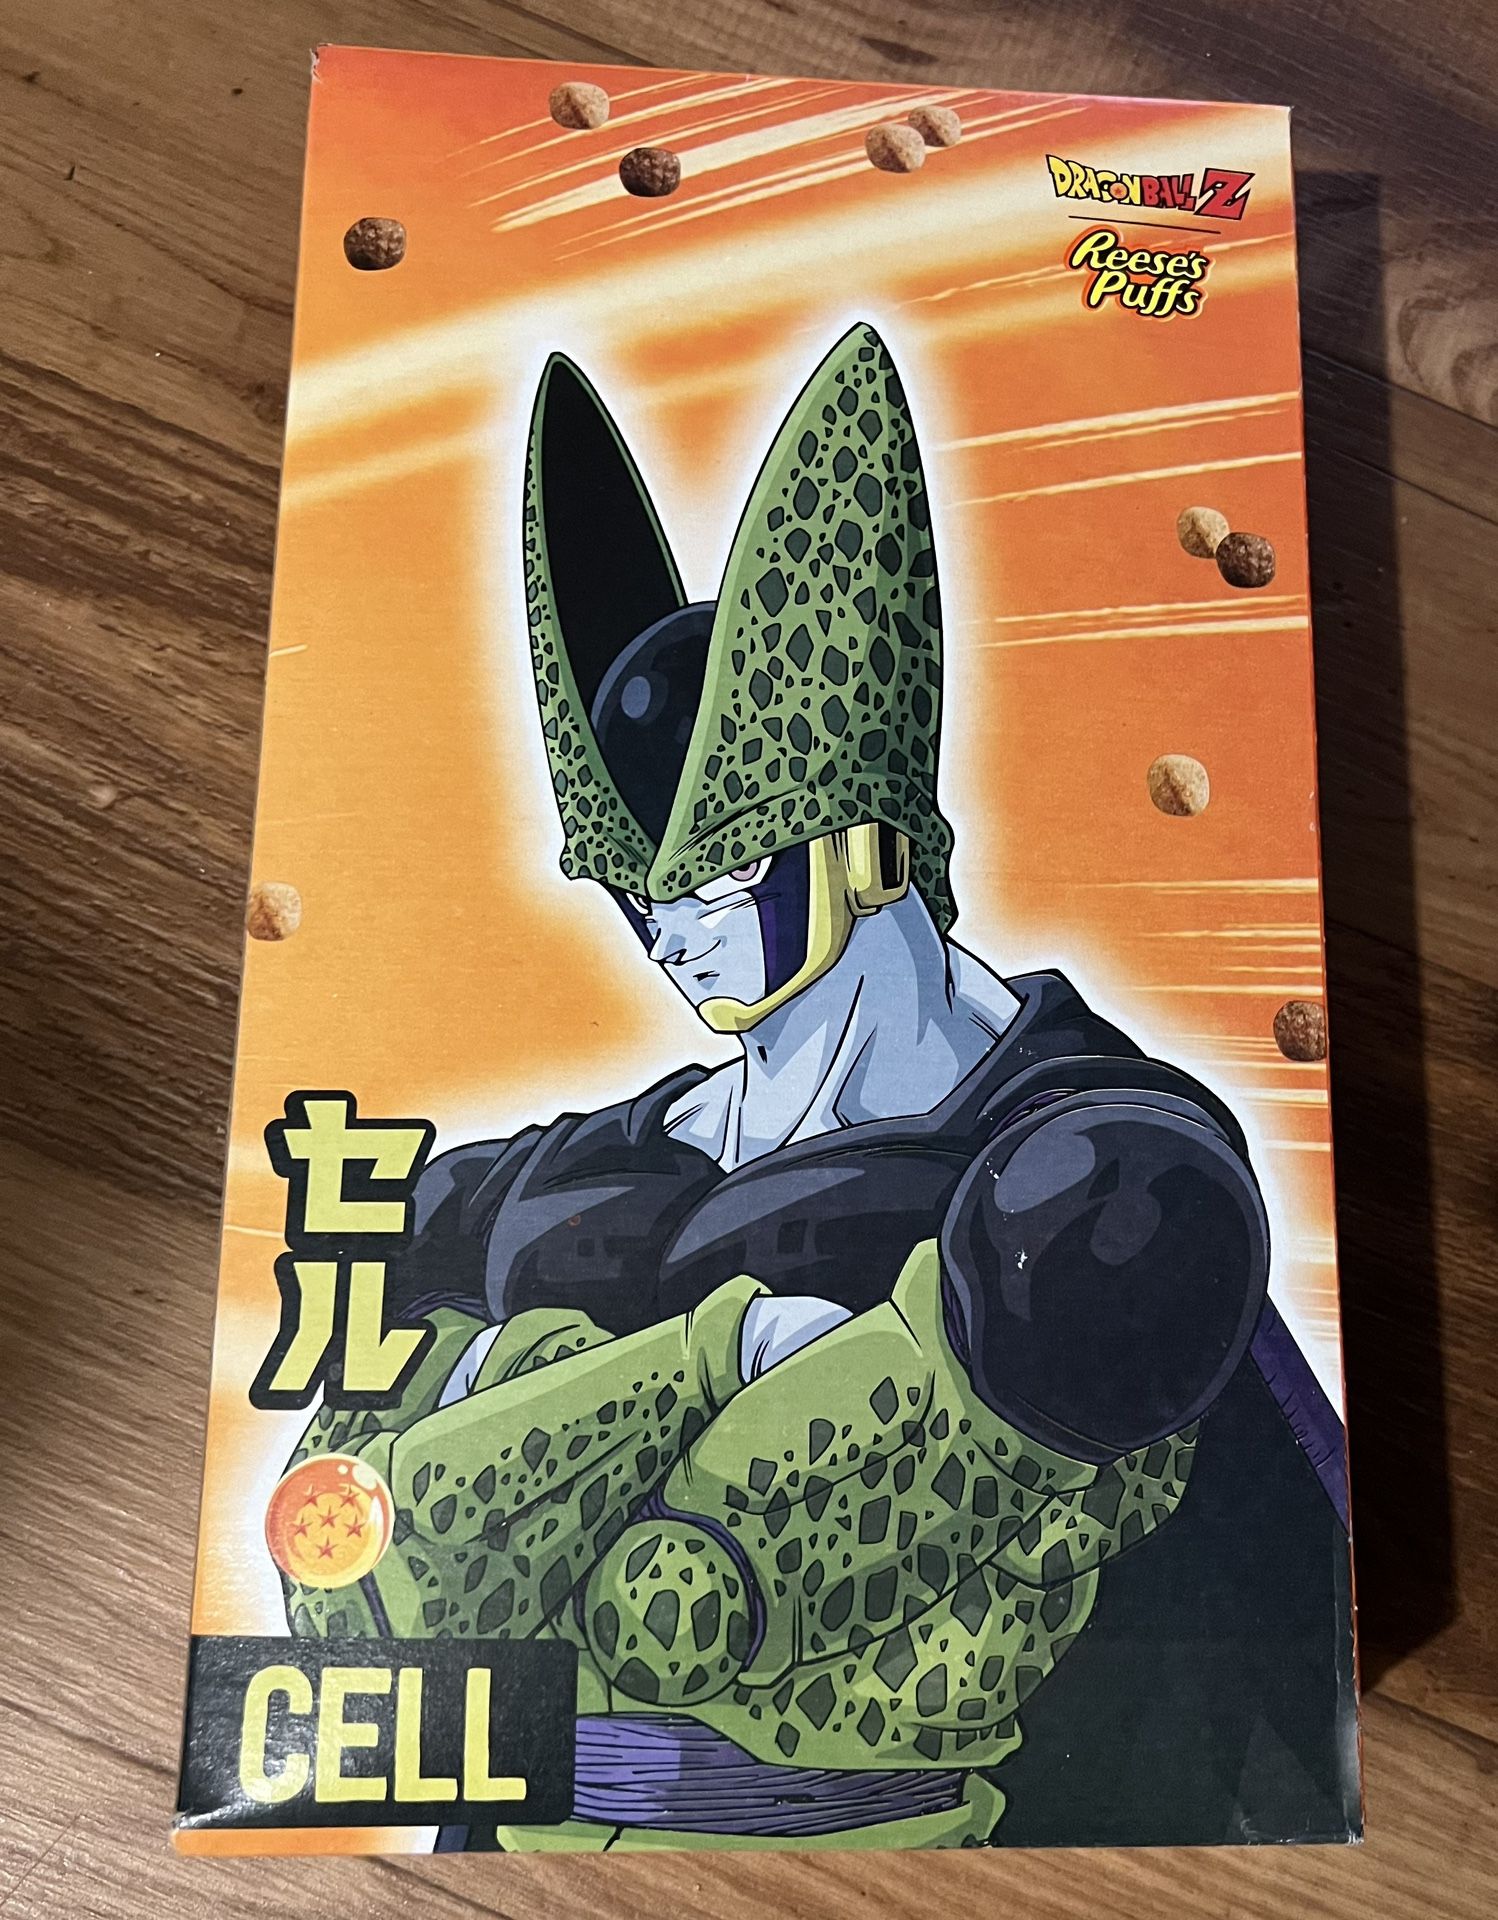 Limited edition Dragonball Z Reese’s Puffs